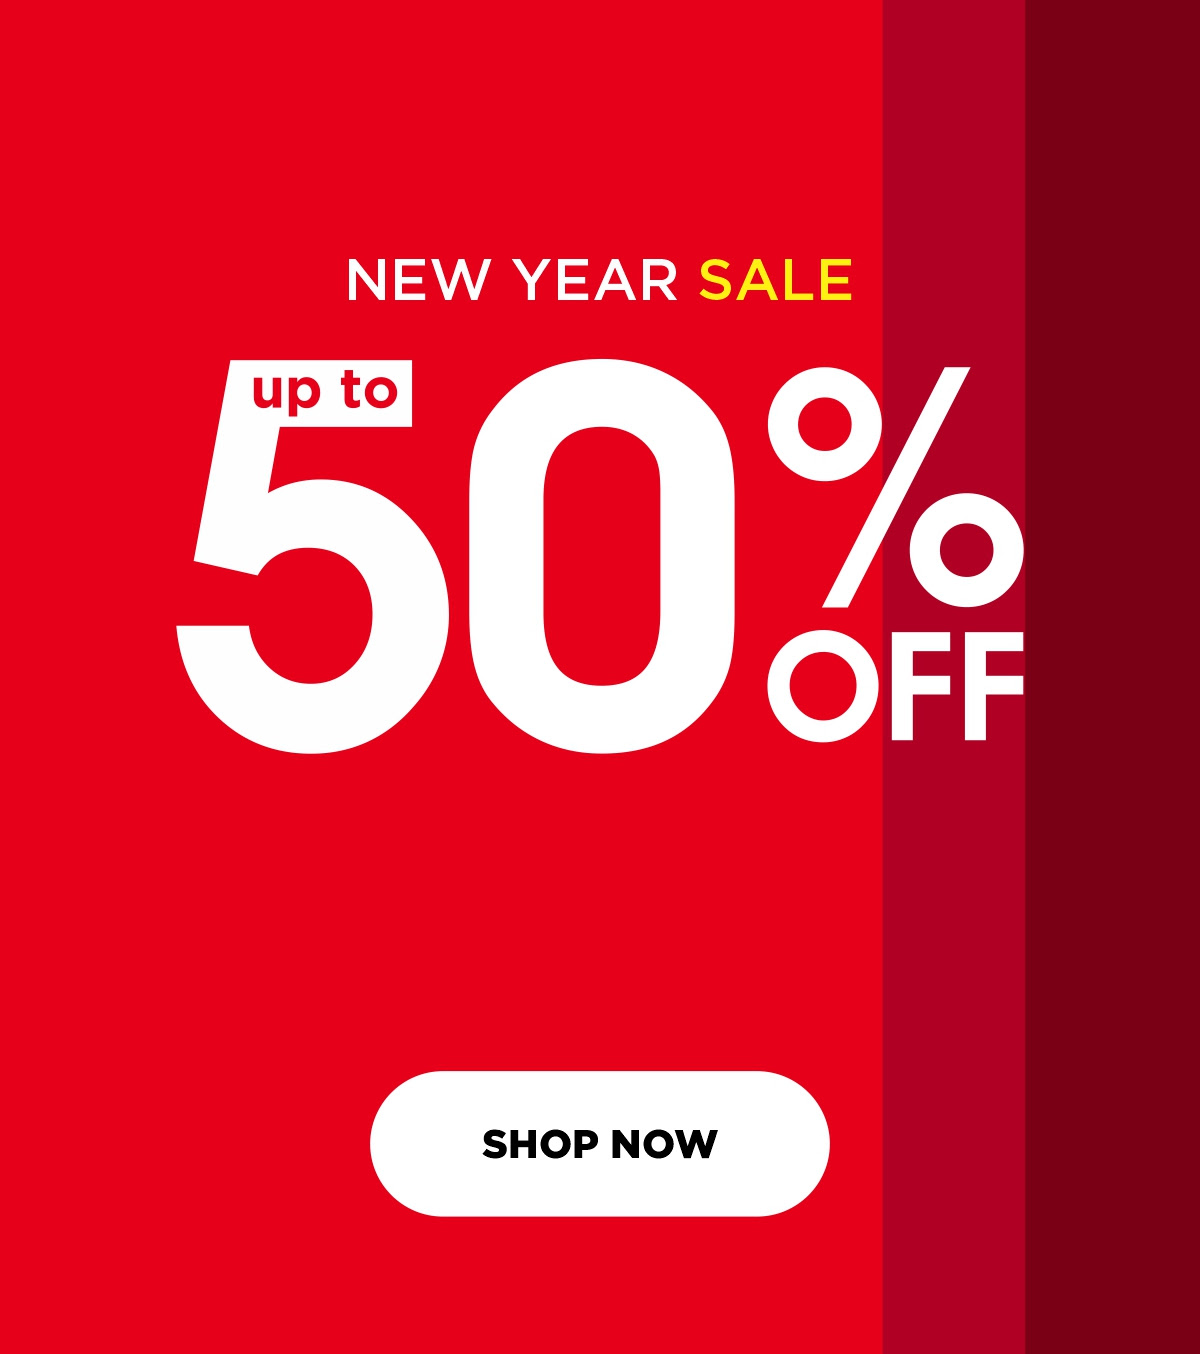 Intersport Elverys - New Year SALE - Up to 50% Off